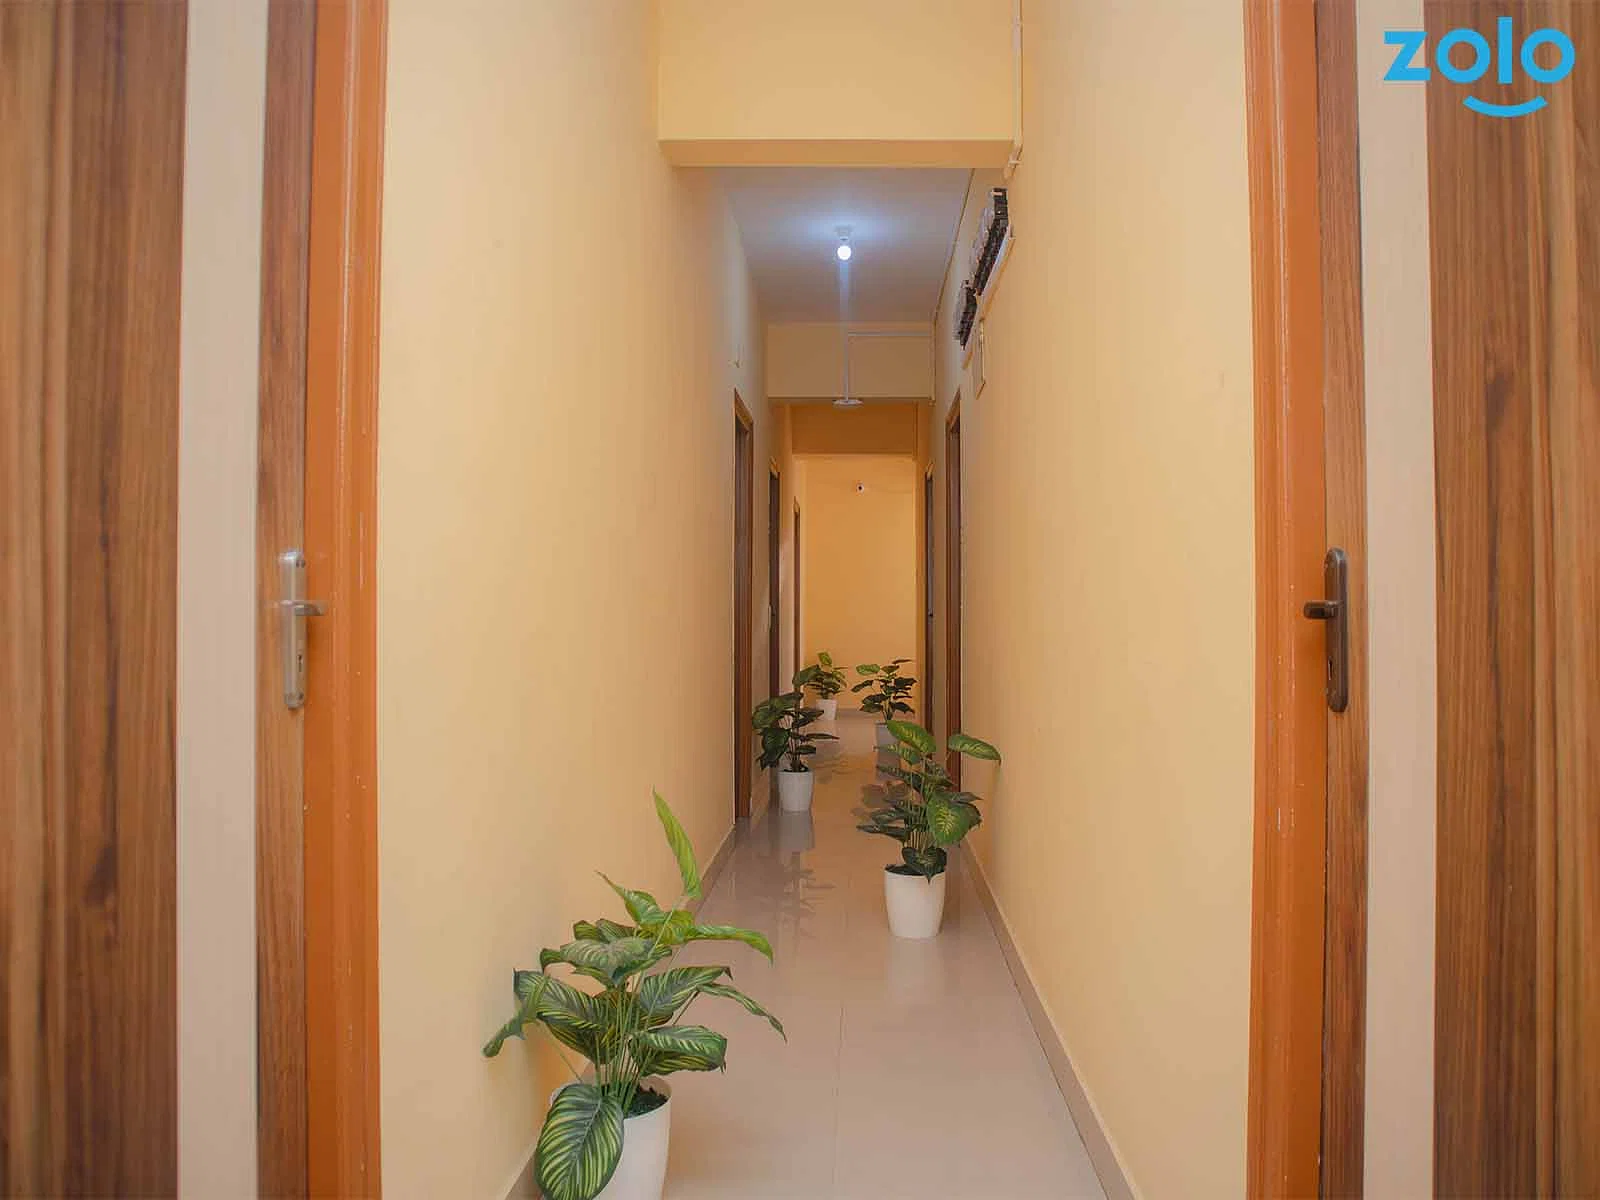 fully furnished Zolo single rooms for rent near me-check out now-Zolo Zenn